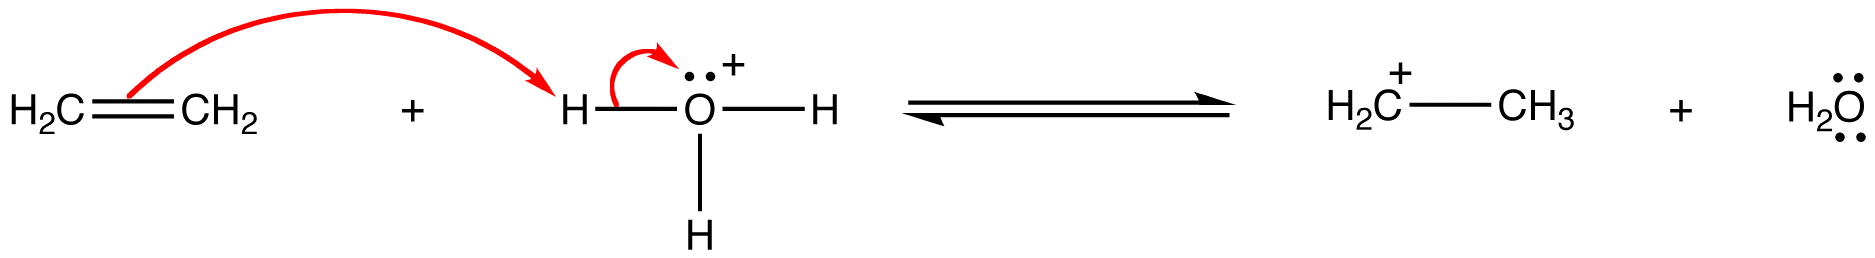 electrophilicaddition2.png